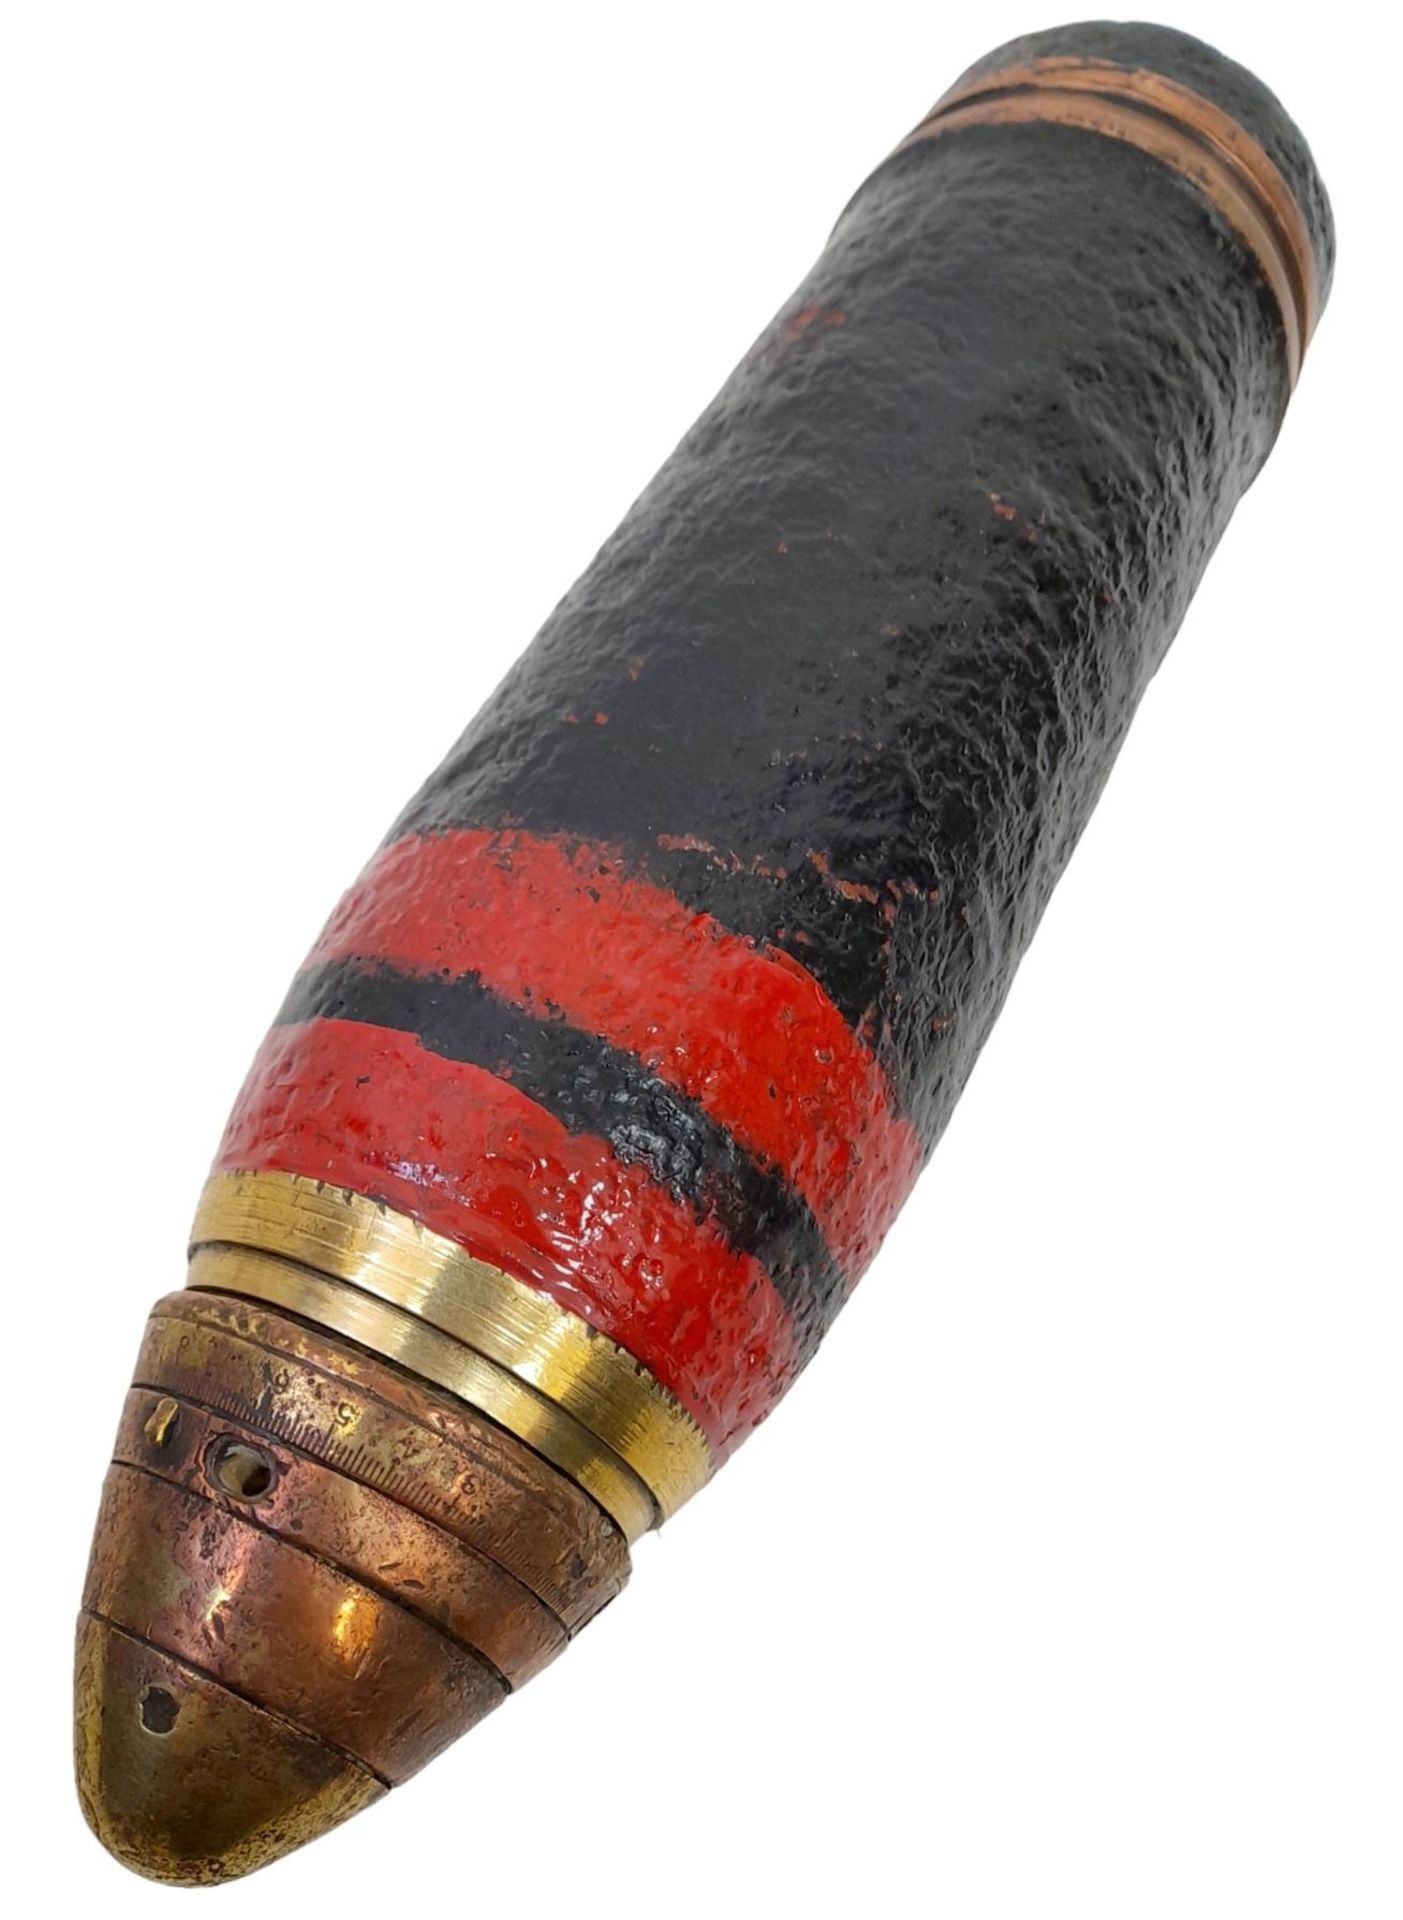 INERT WW1 Cutaway 18 Pdr Shrapnel Shell Projectile. Complete with Brass No 80 Time Fuse. UK MAINLAND - Image 3 of 5